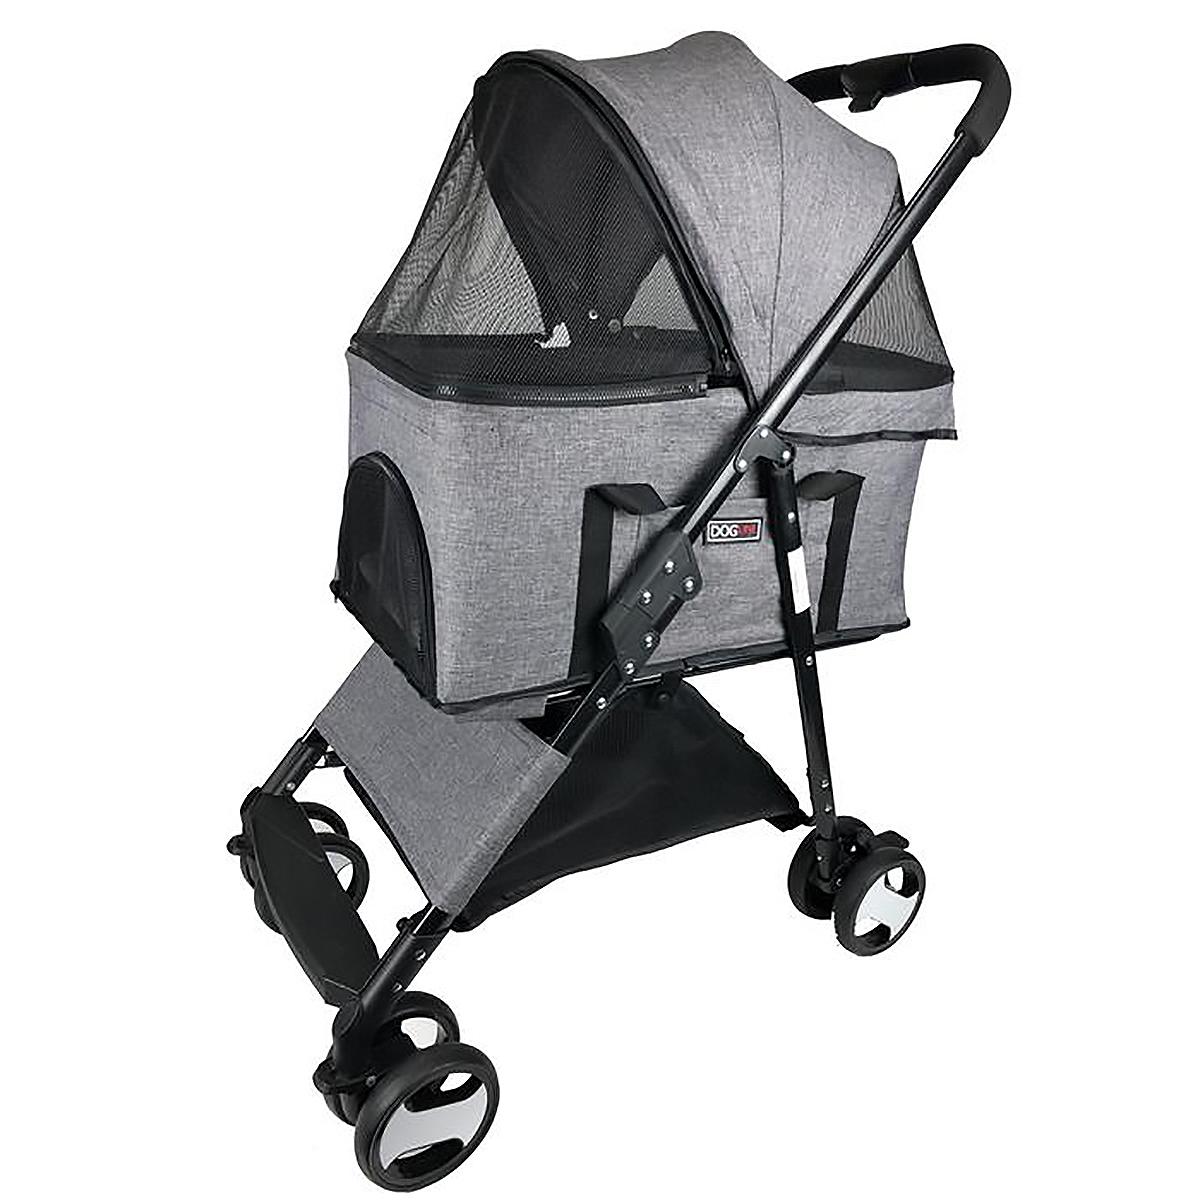 Dogline Executive Pet Stroller with Removable Cradle - Gray